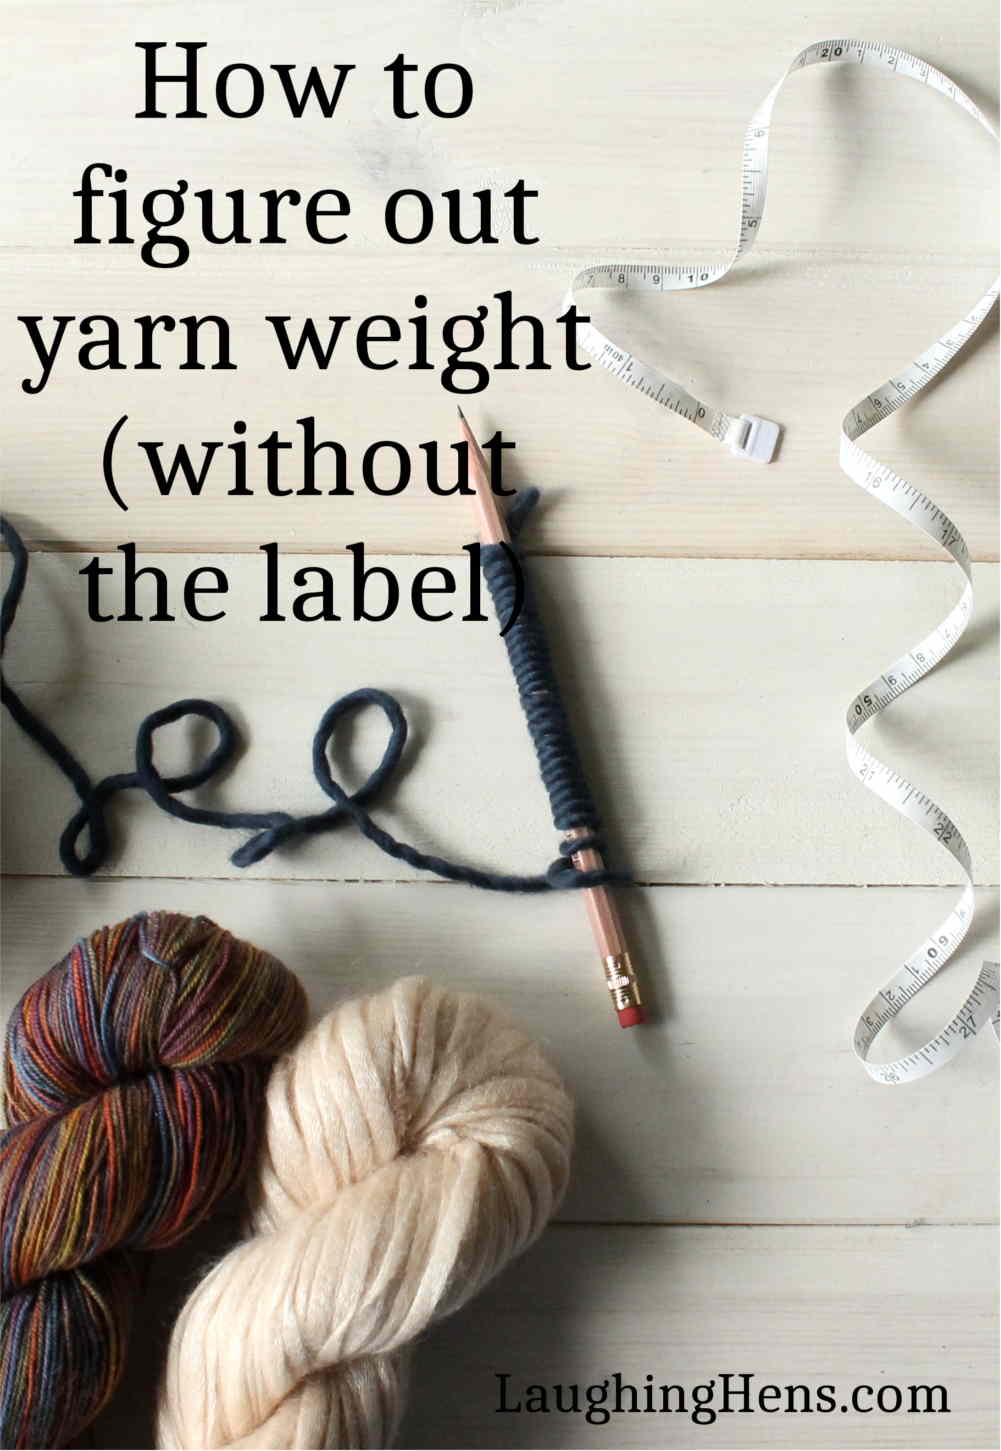 How to figure out yarn weight